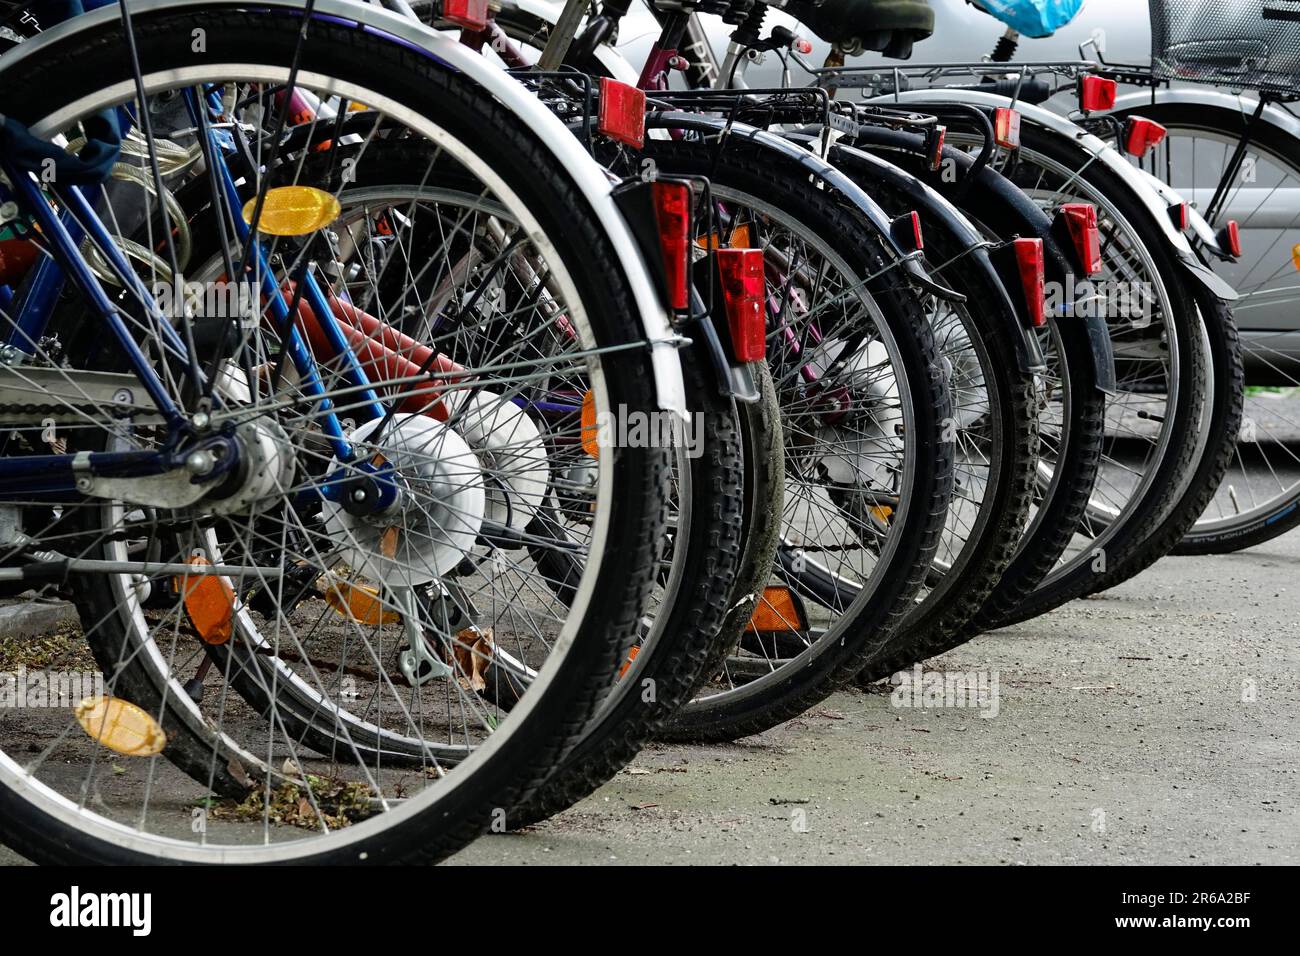 Bicycle parking, Germany Stock Photo